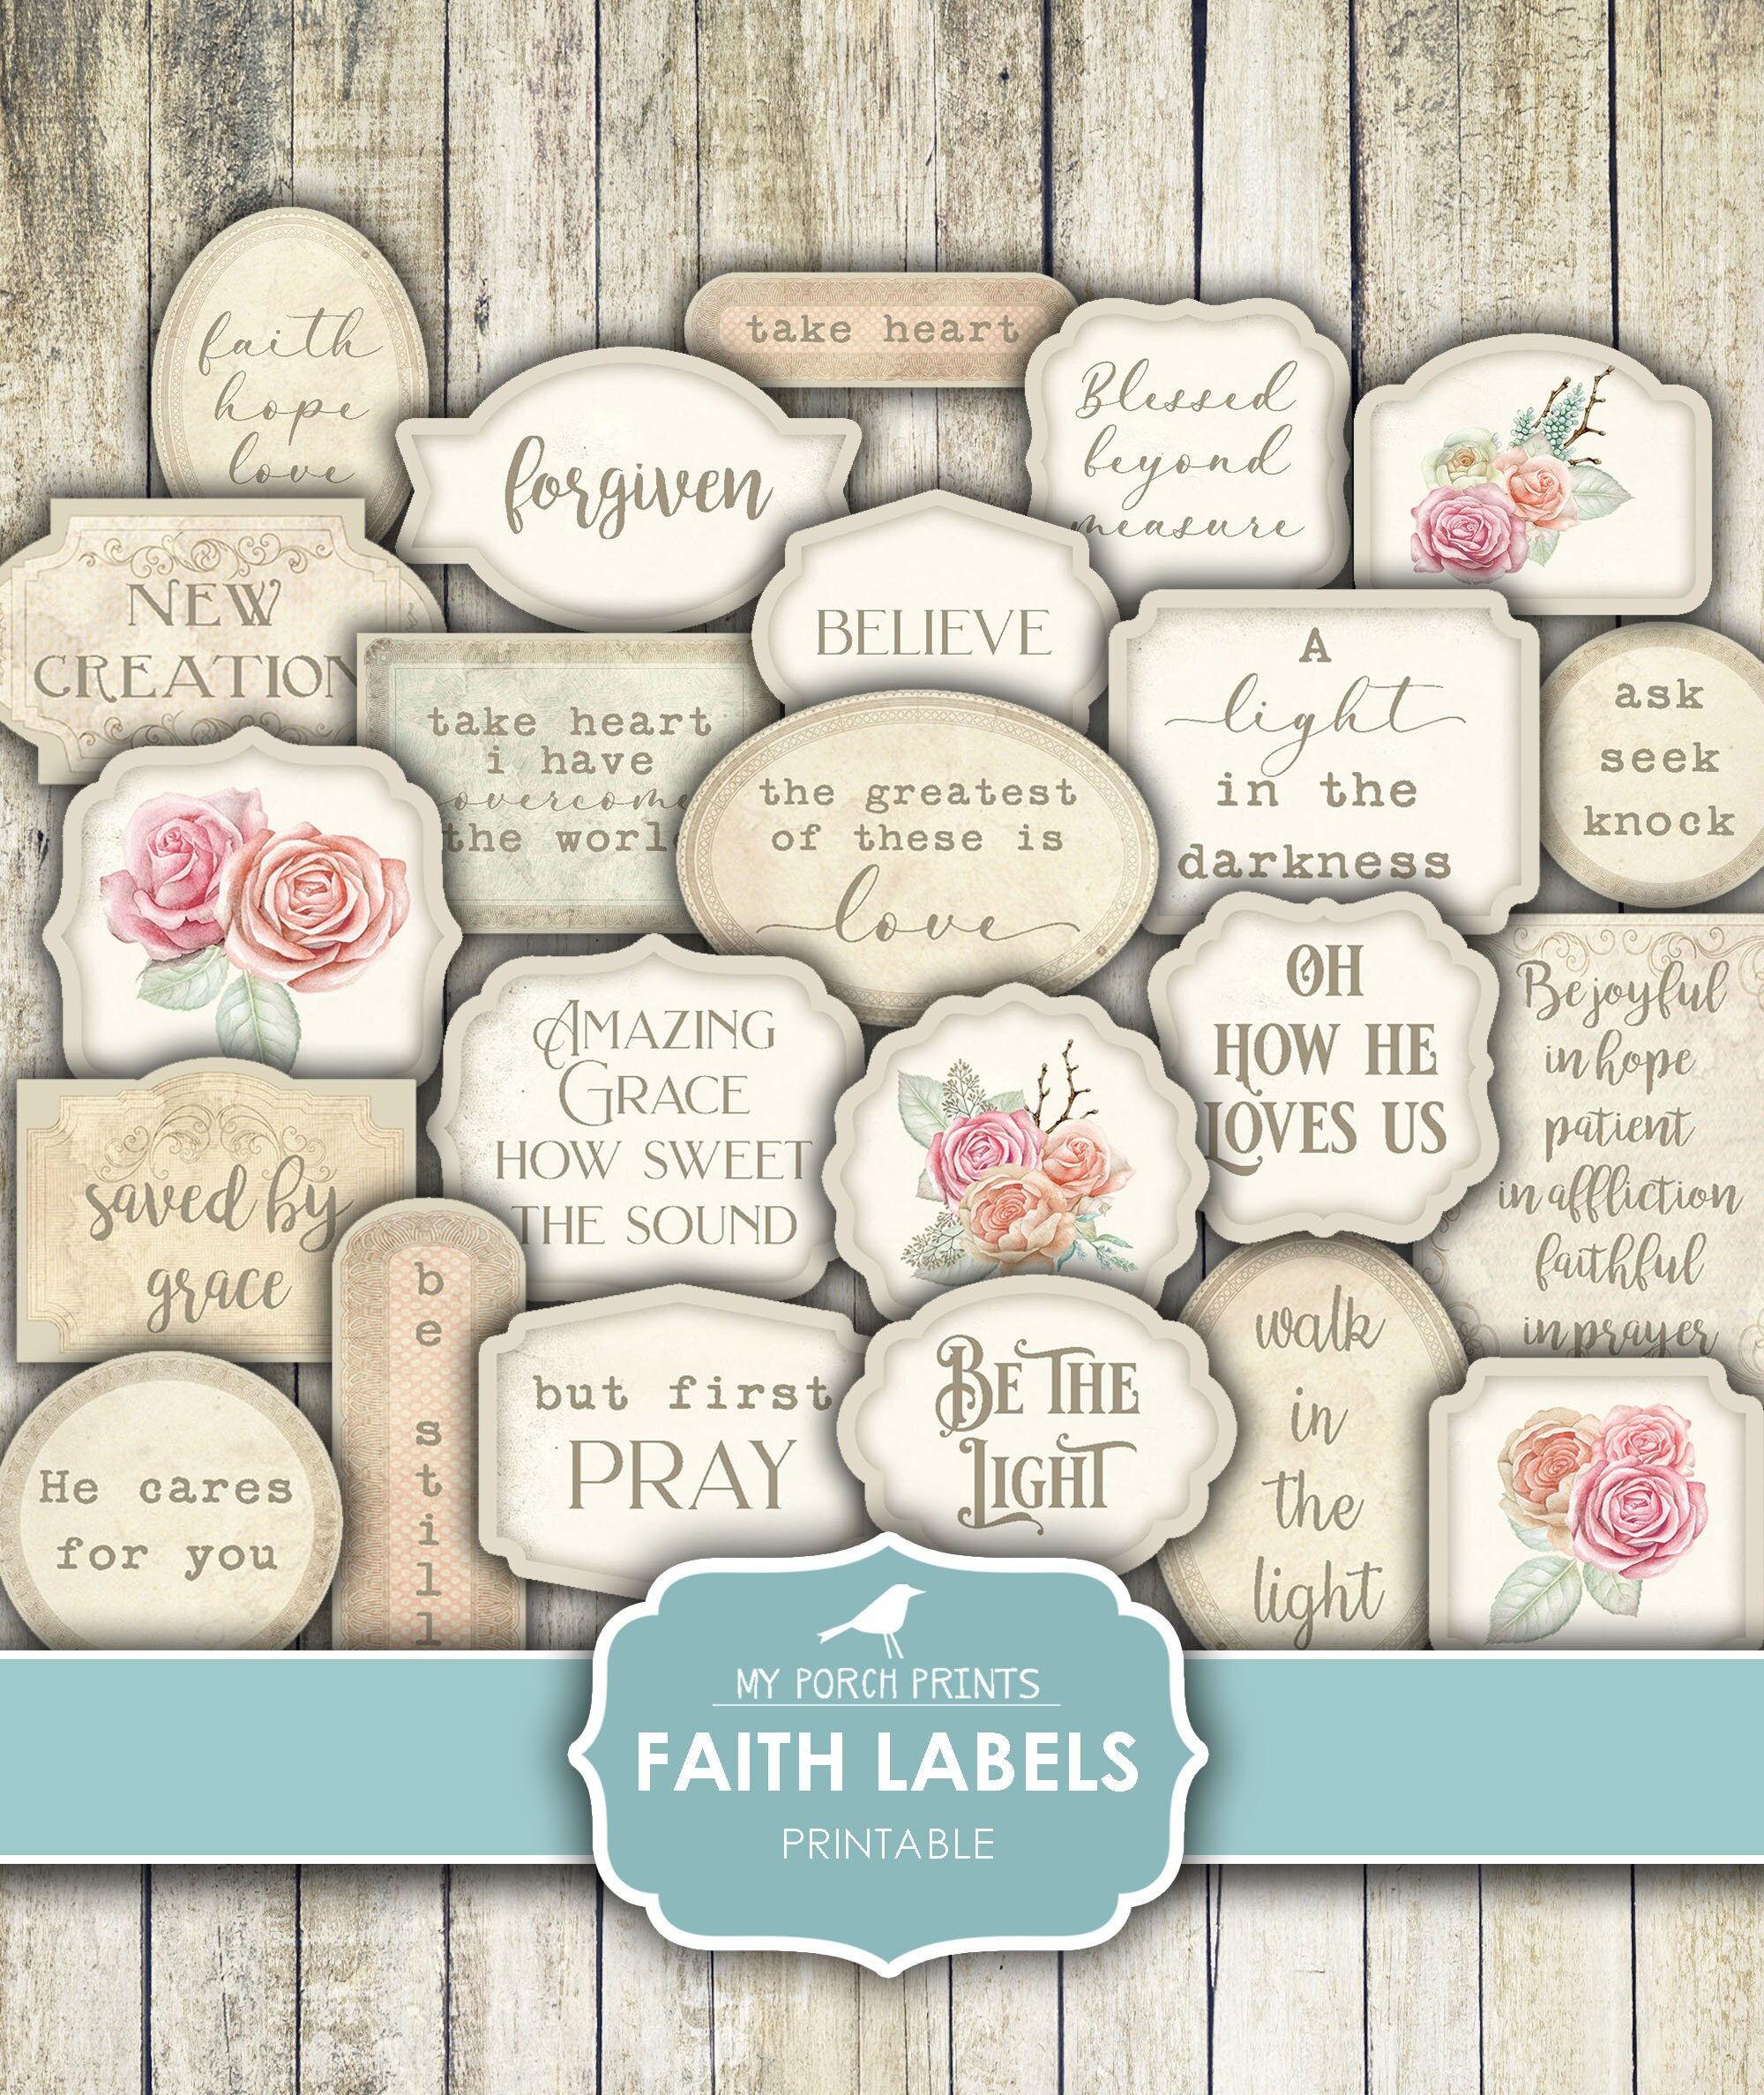 Stickers - Bible Journaling (Creative by Design) – Faith Reflections